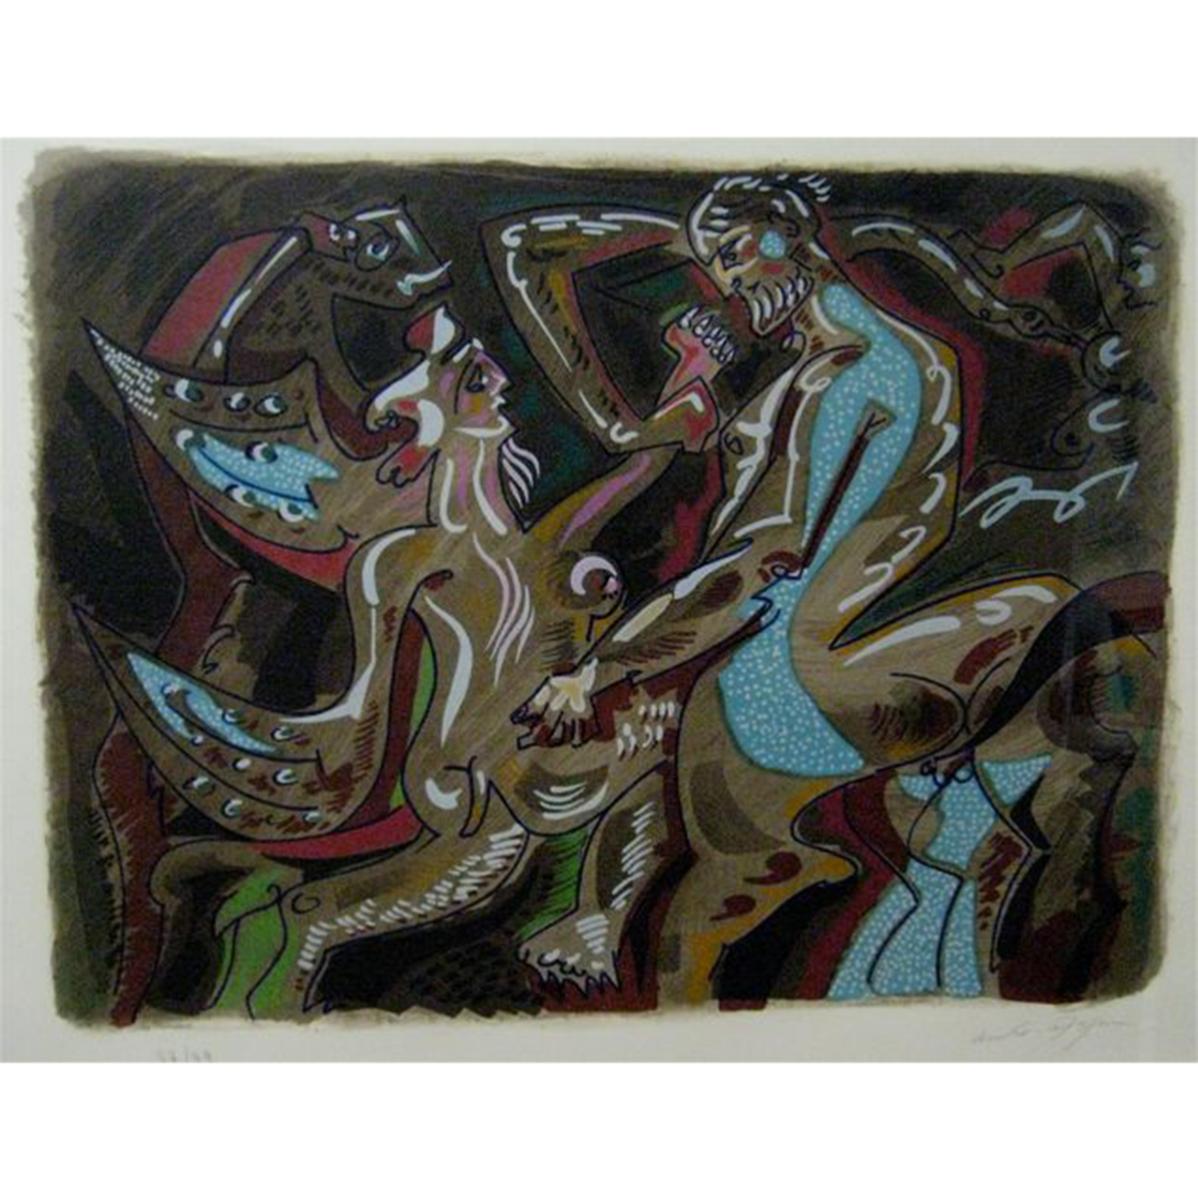 ANDRE MASSON (FRENCH, 1896-1987)